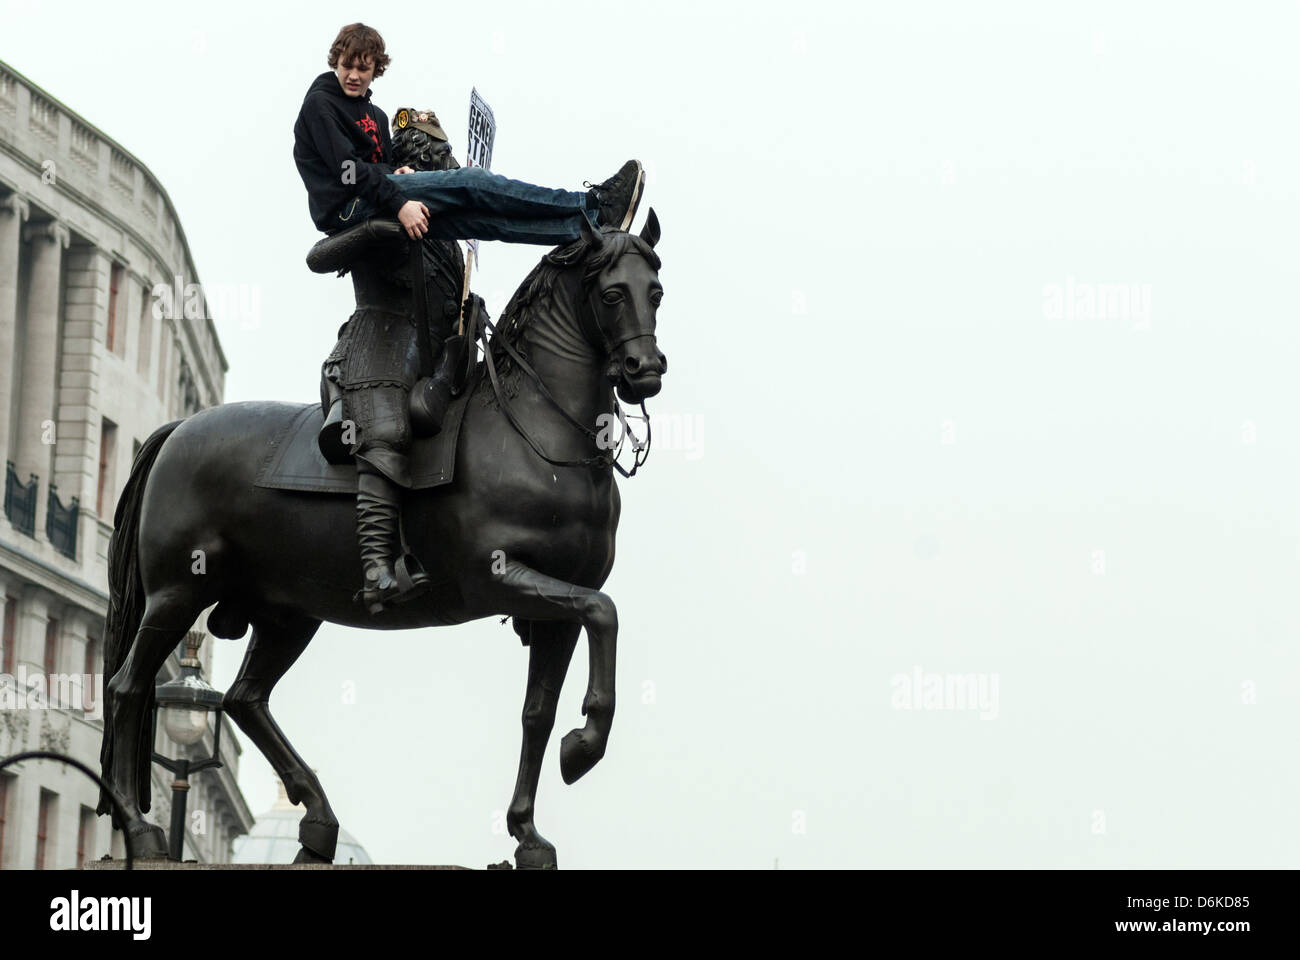 A protester is sitting on the statue of Charles I in Trafalgar Square. Stock Photo